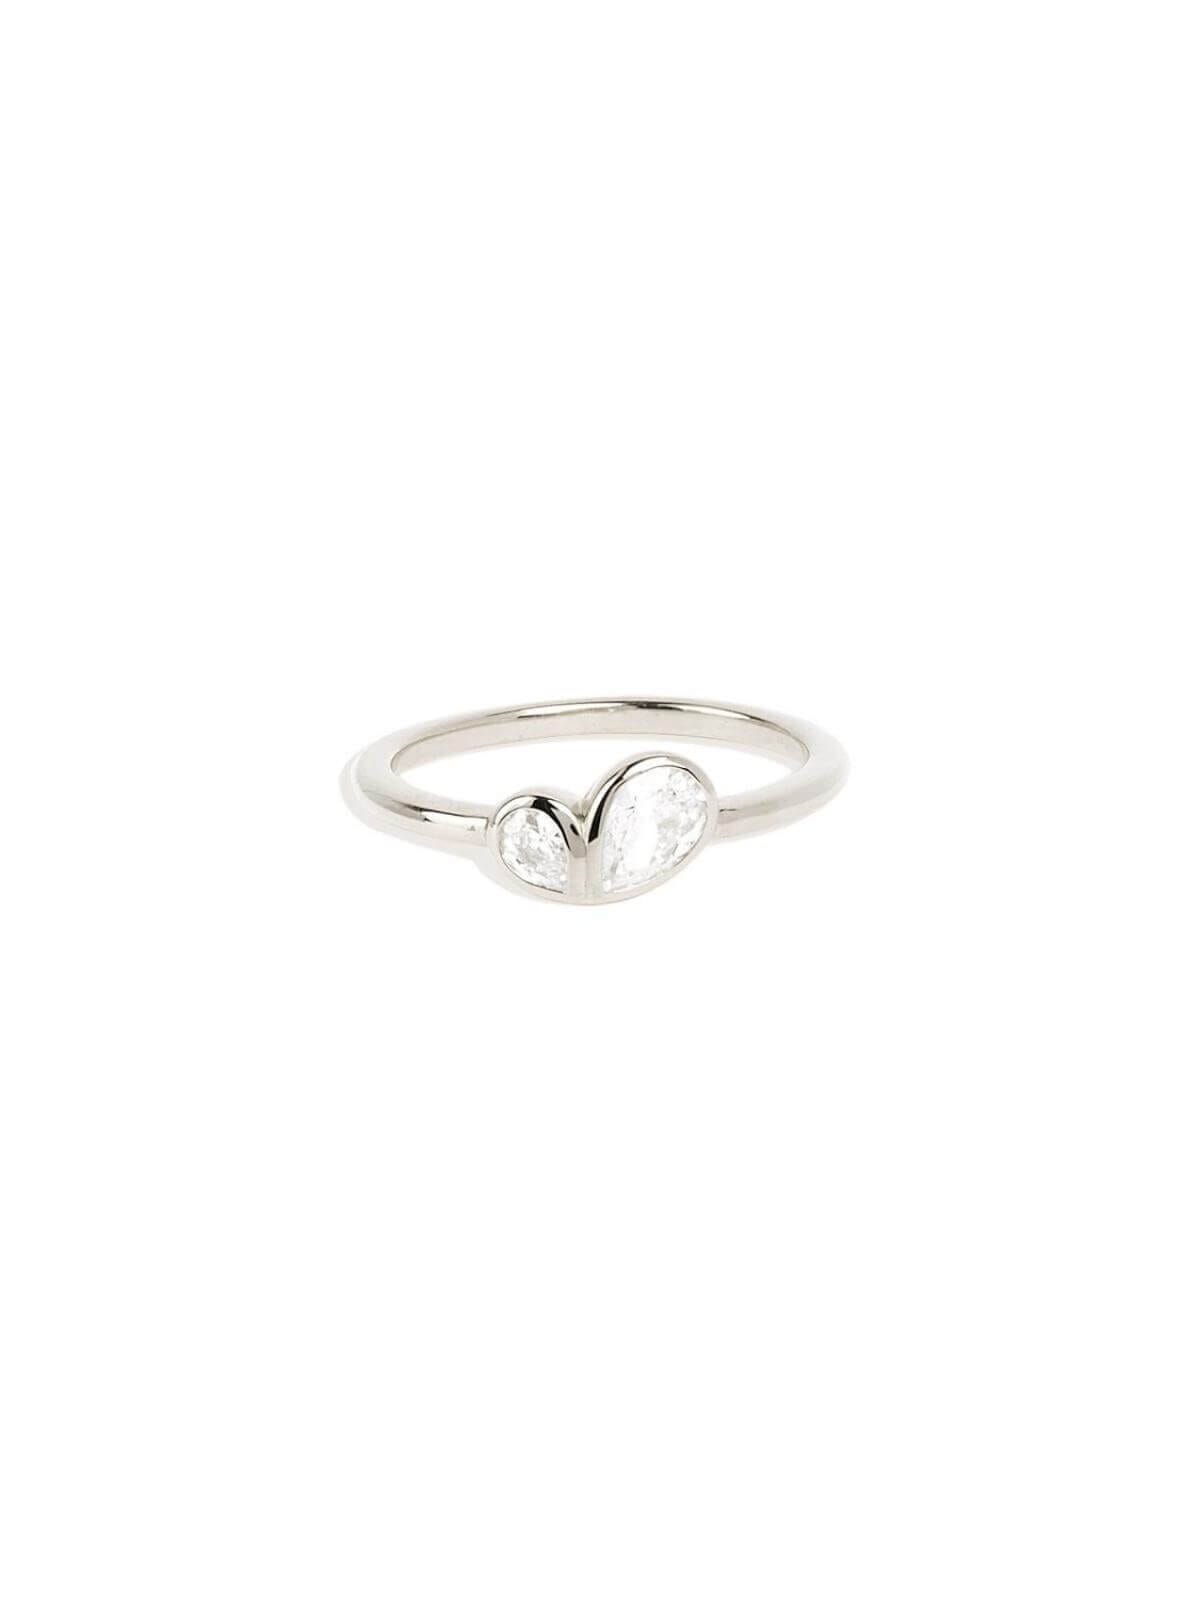 By Charlotte | Adored Ring - Silver | Perlu